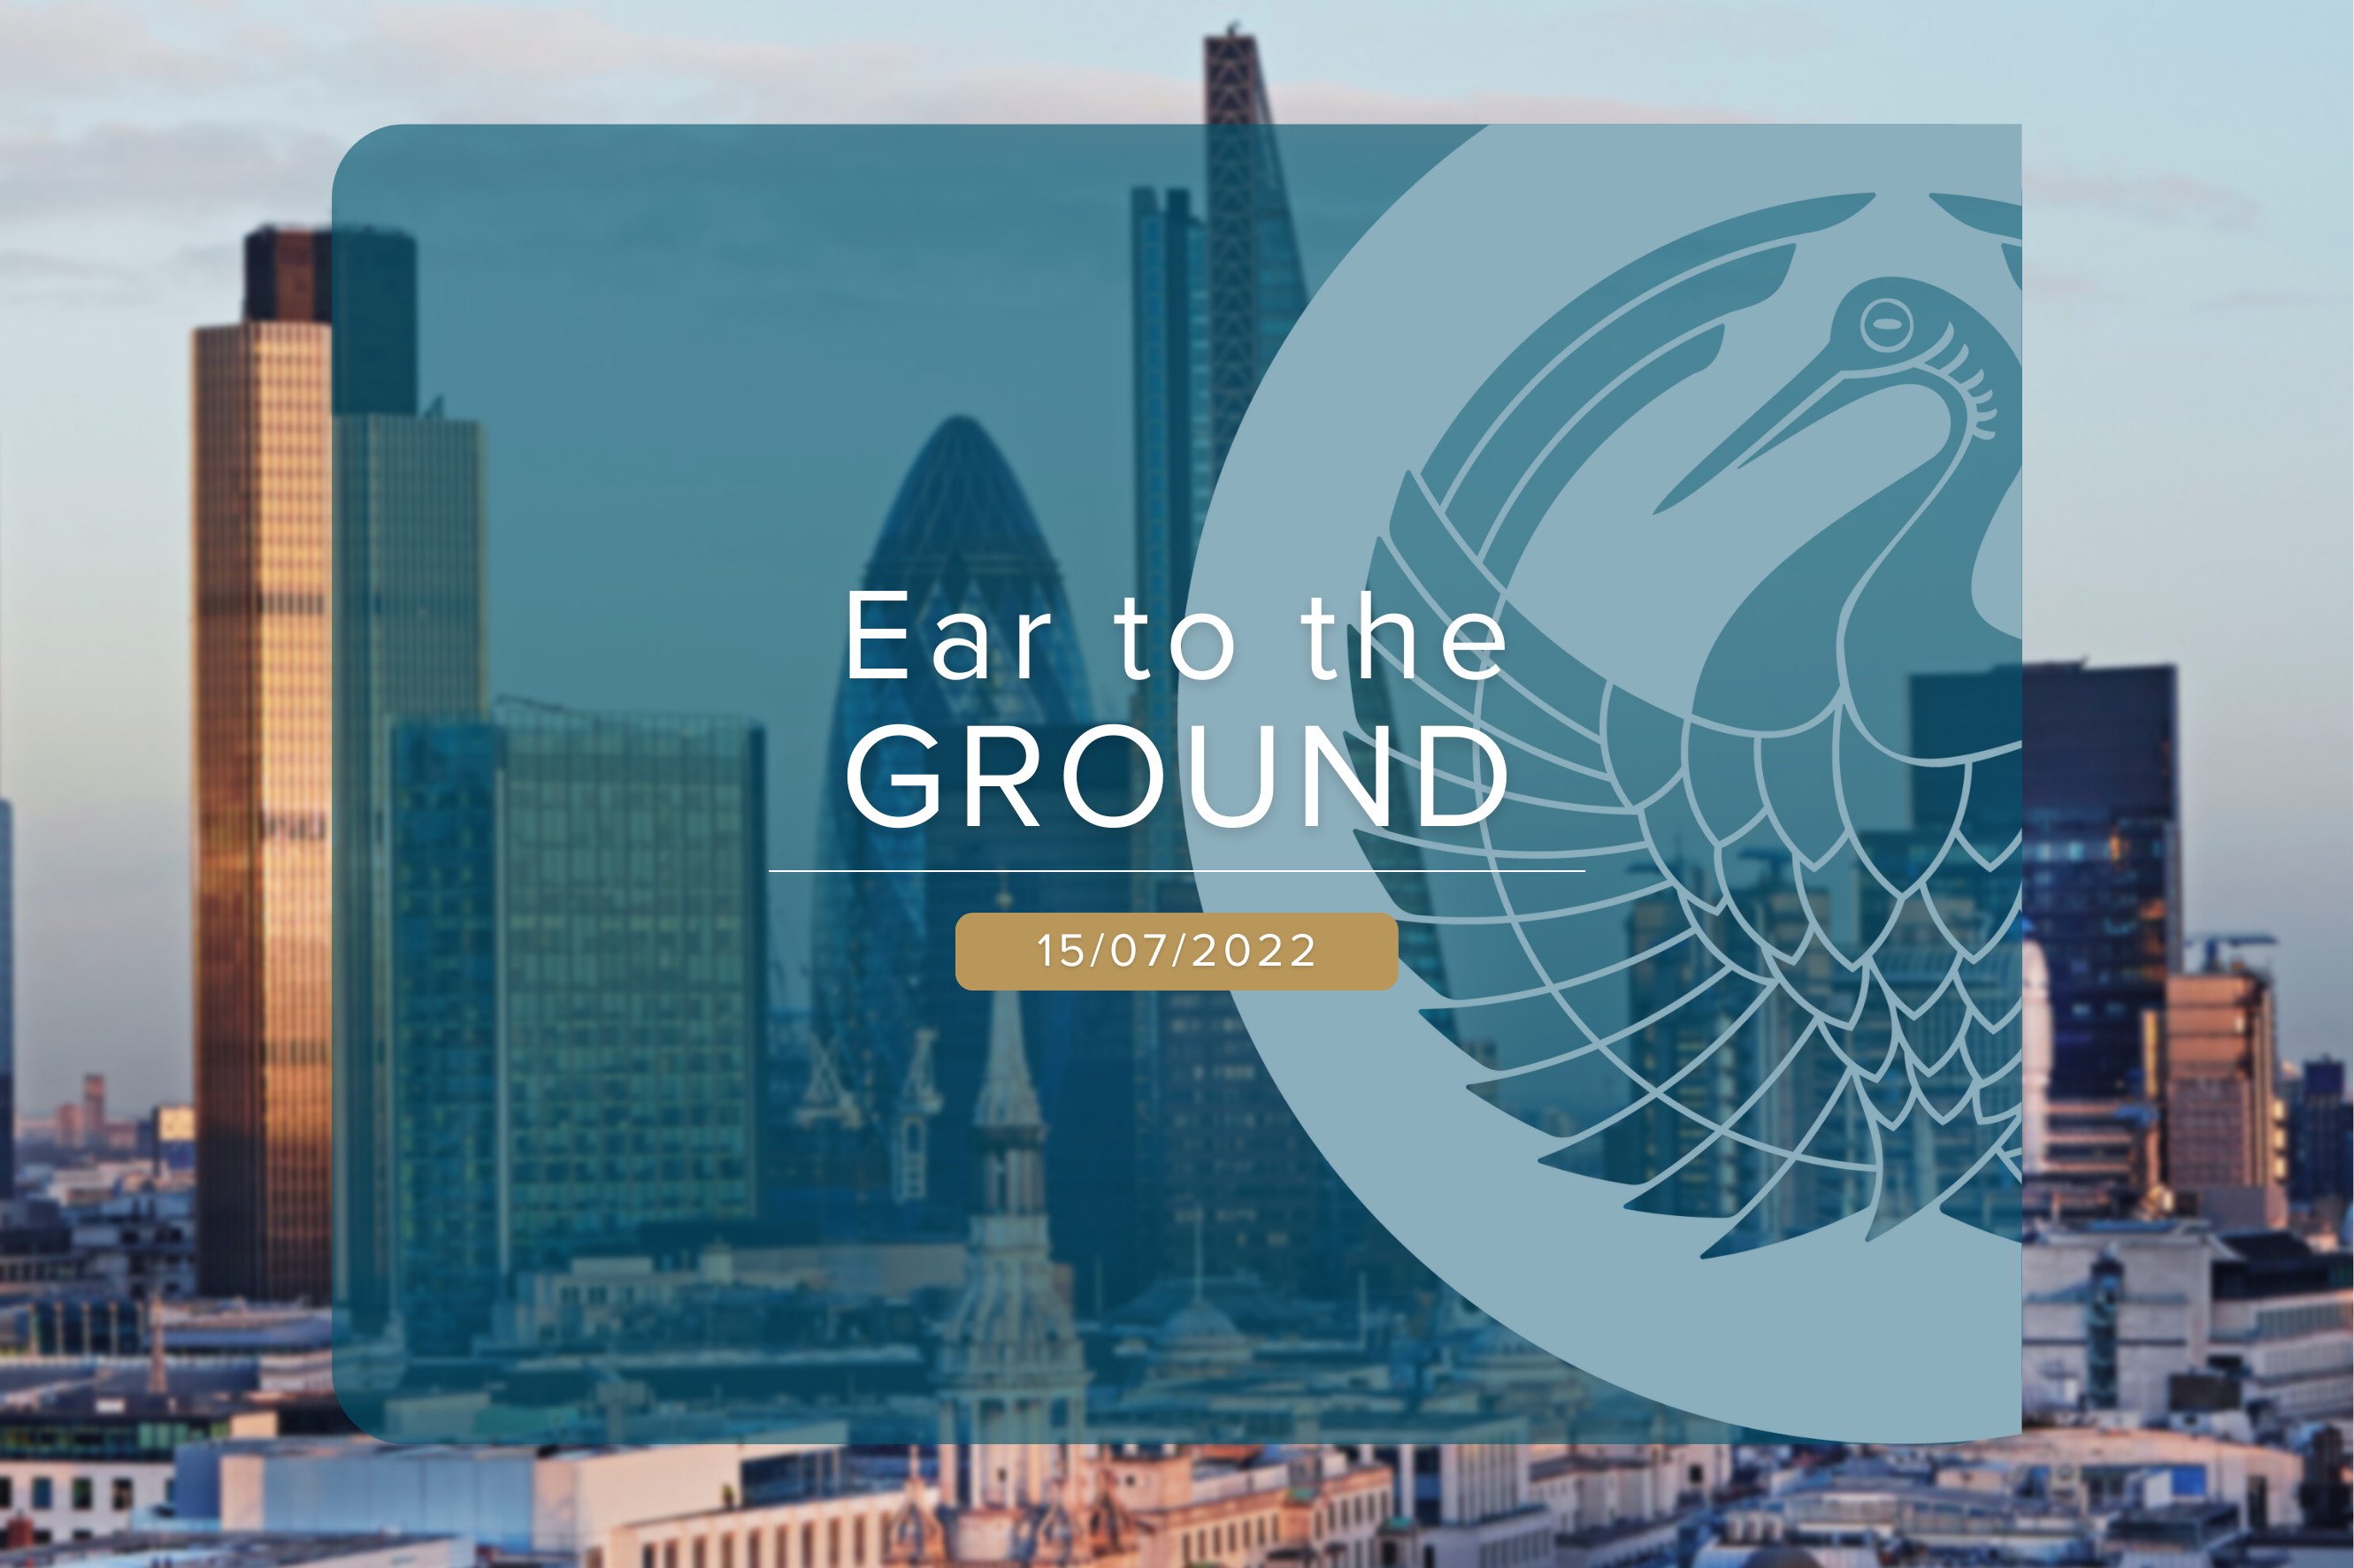 Ear to the ground 15/07/22